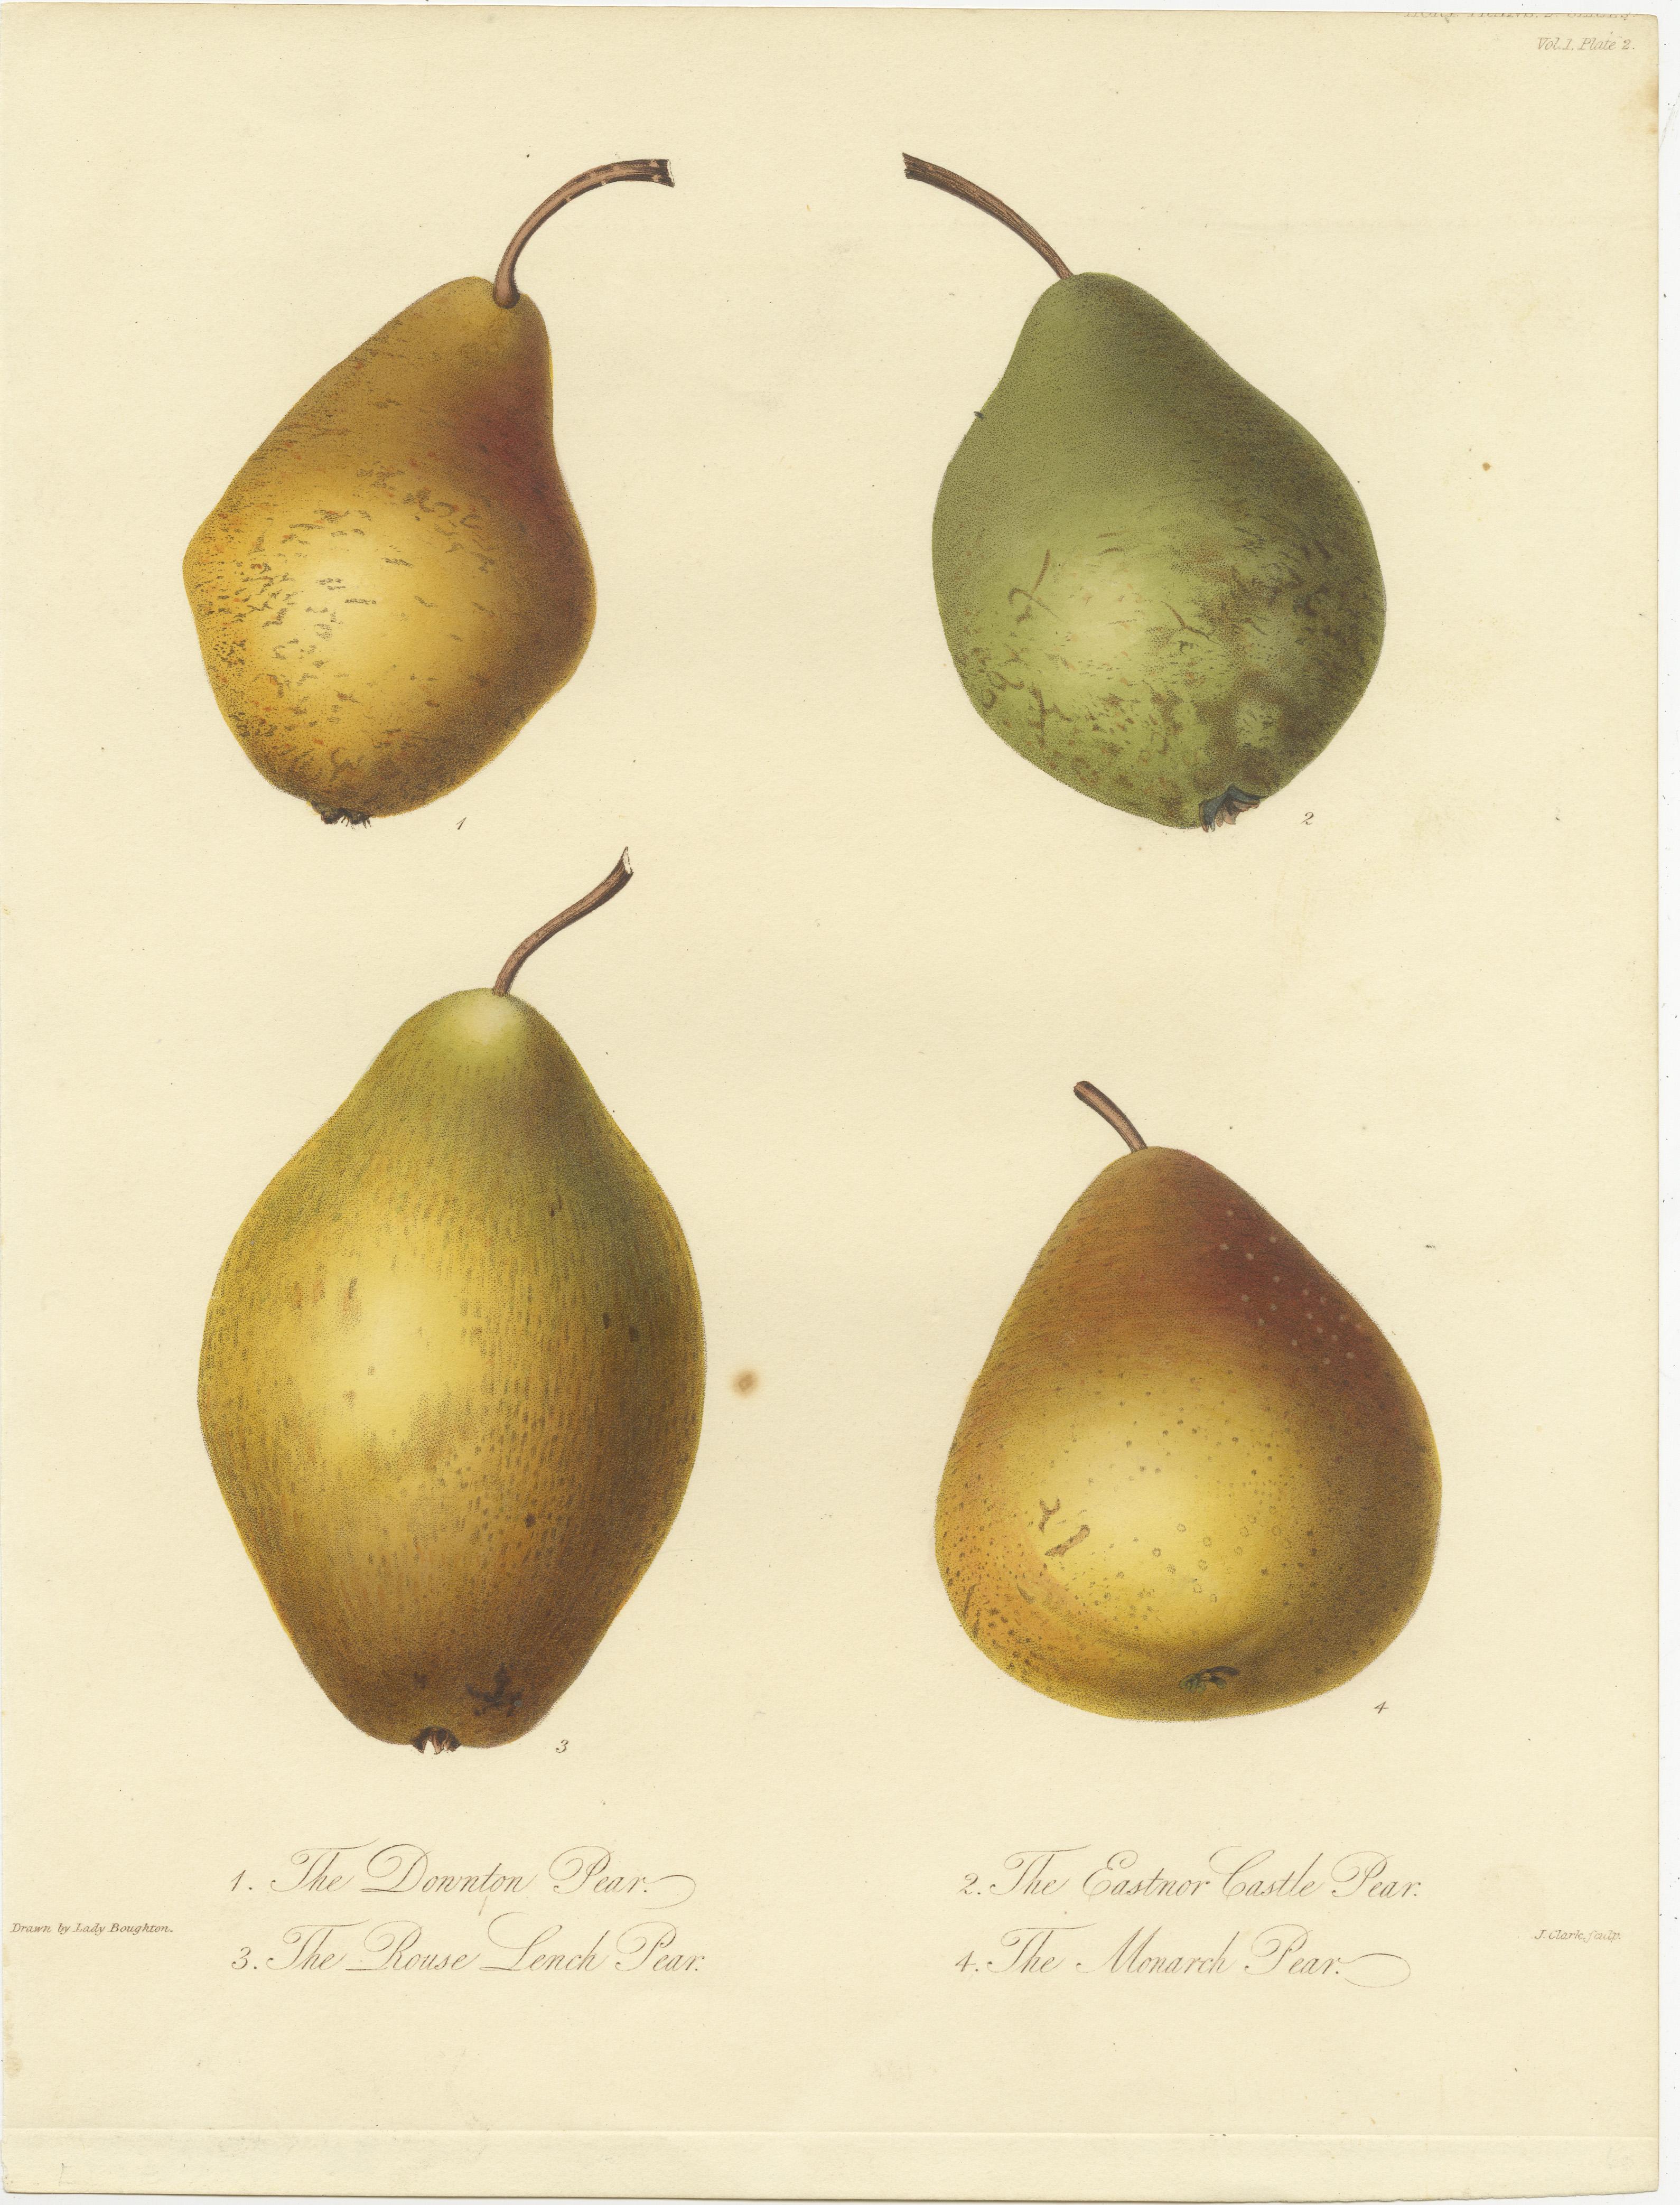 Set of 2 antique prints of pears. It shows the Downton Pear, Rouse Lench Pear, Eastnor Castle Pear, Monarch Pear, Doyenne Gris, Bezy de la Motte, Orange d'hiver and Beurrée Rance. These prints originate from 'Transactions of the Horticultural